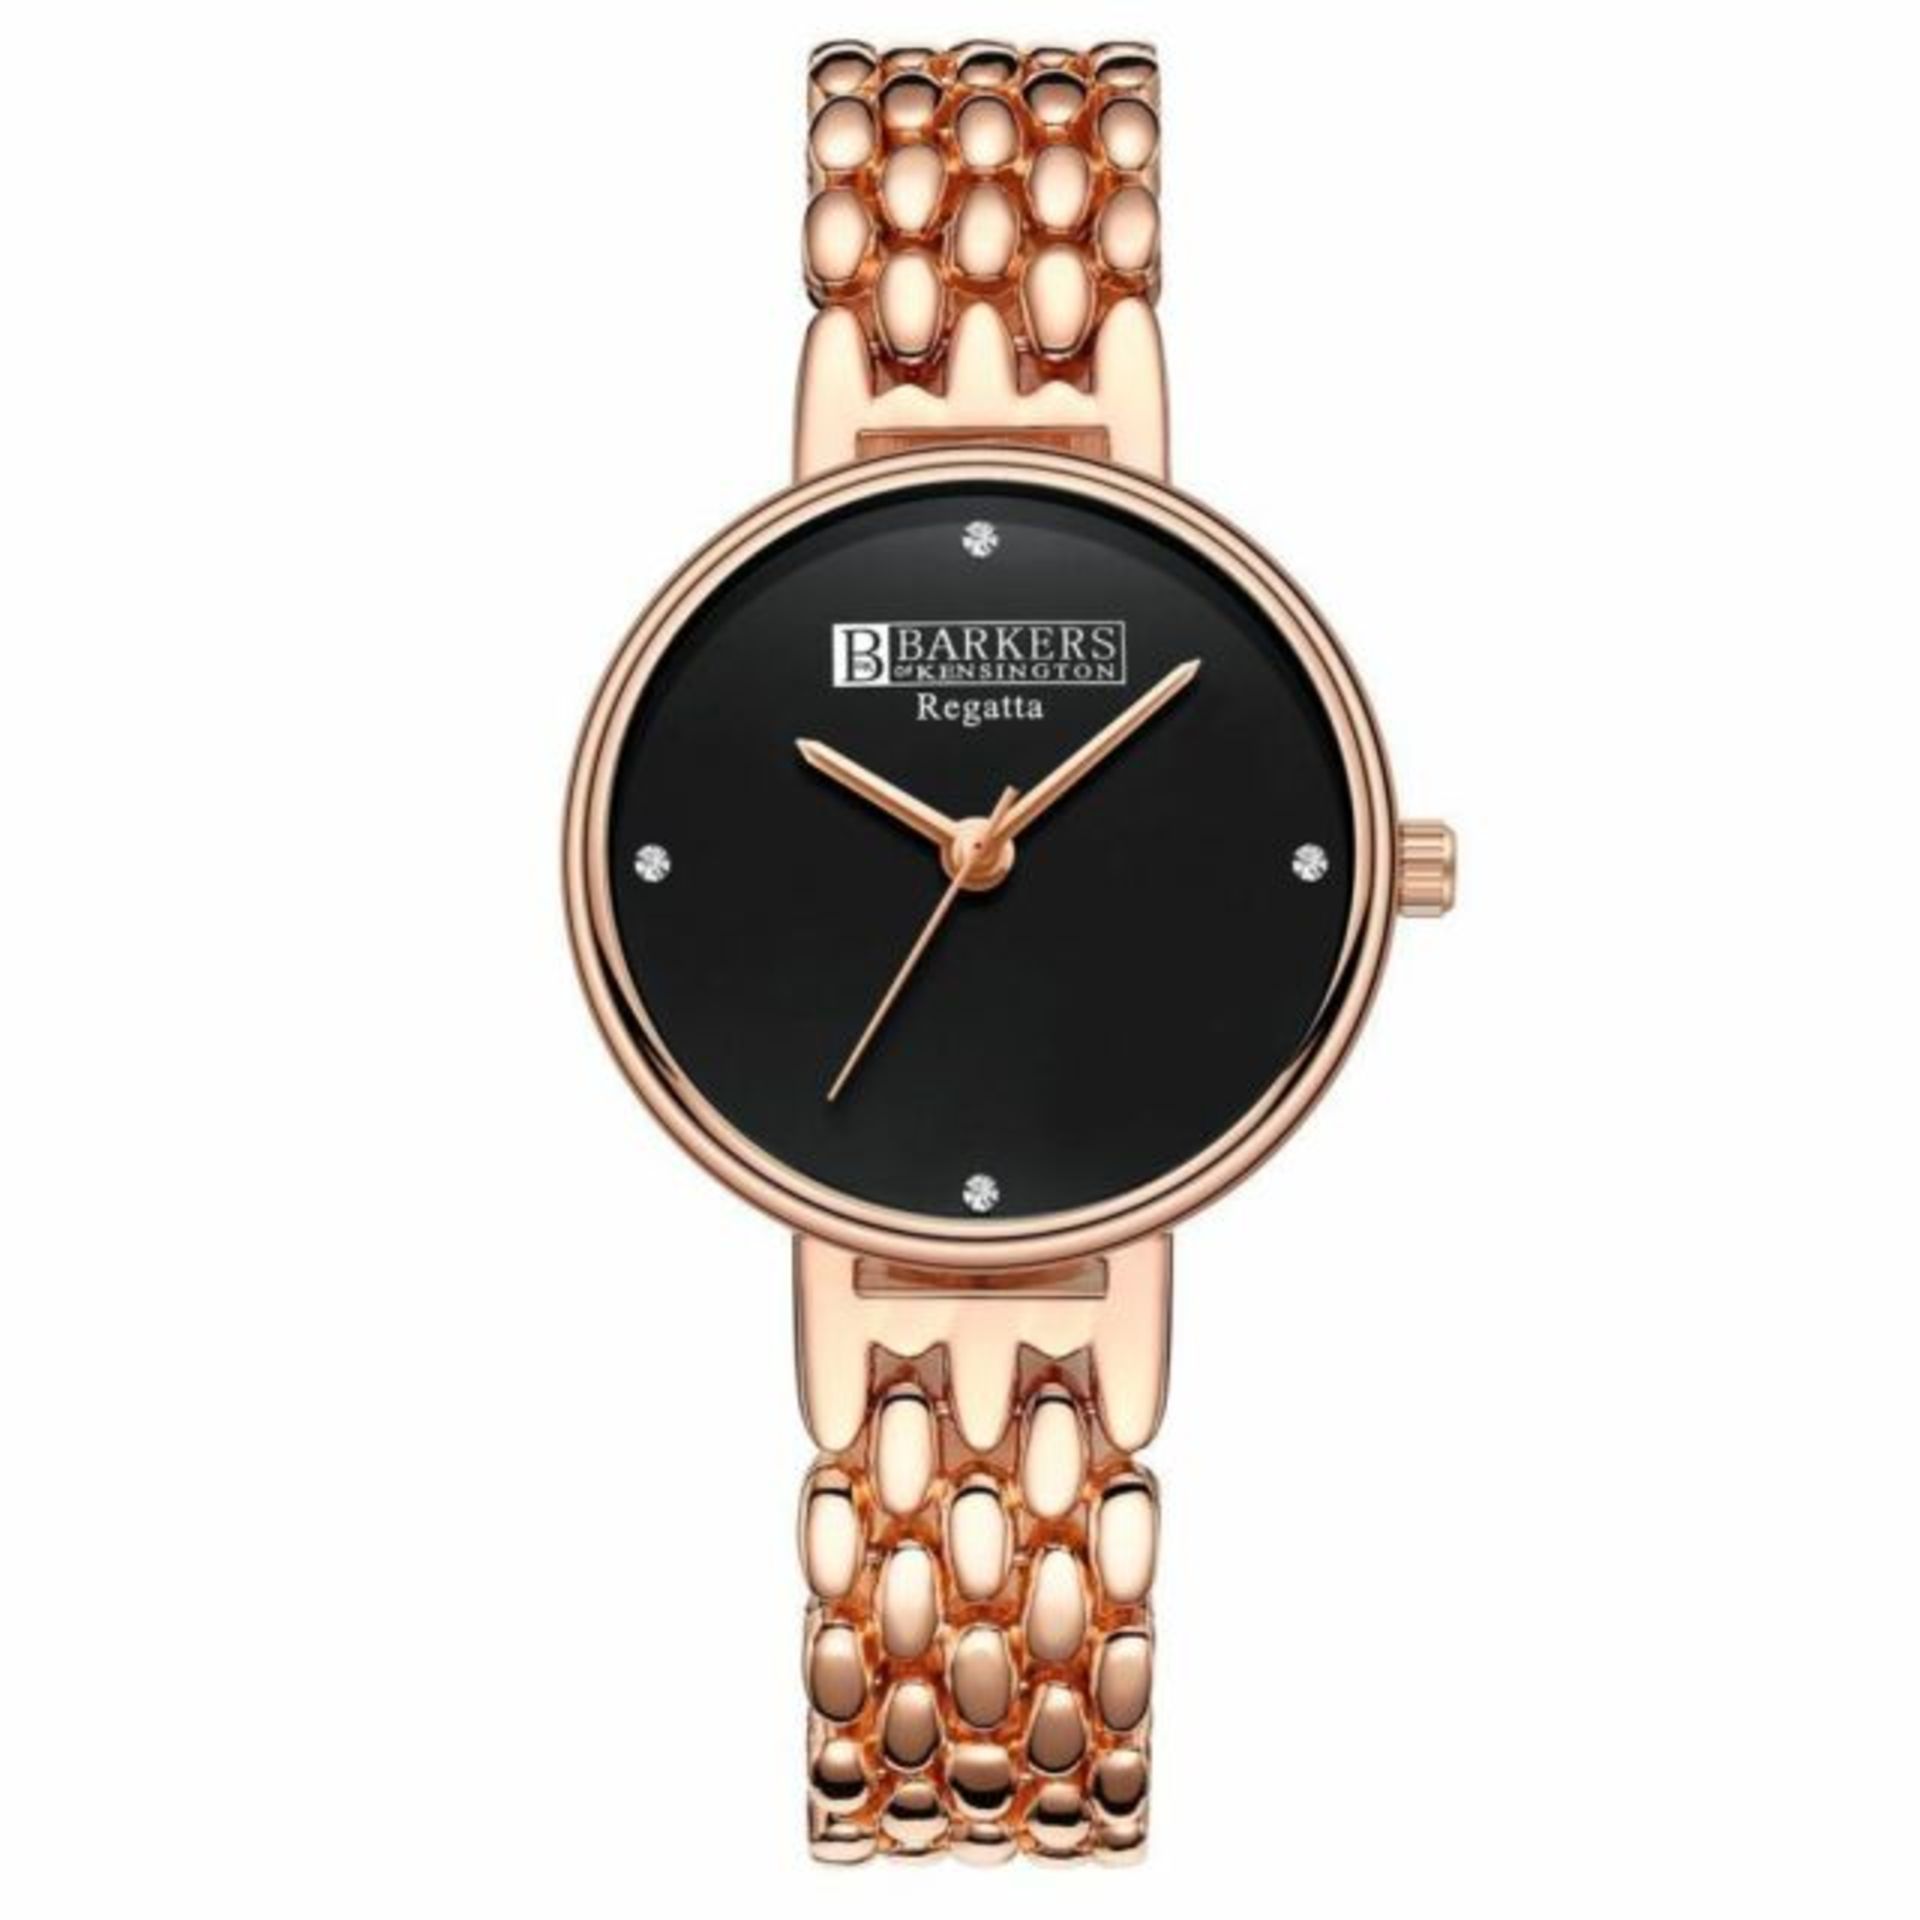 Barkers of Kensington Regatta Black Face with Crystals Women's stylish Watch, new and boxed. - Image 4 of 4